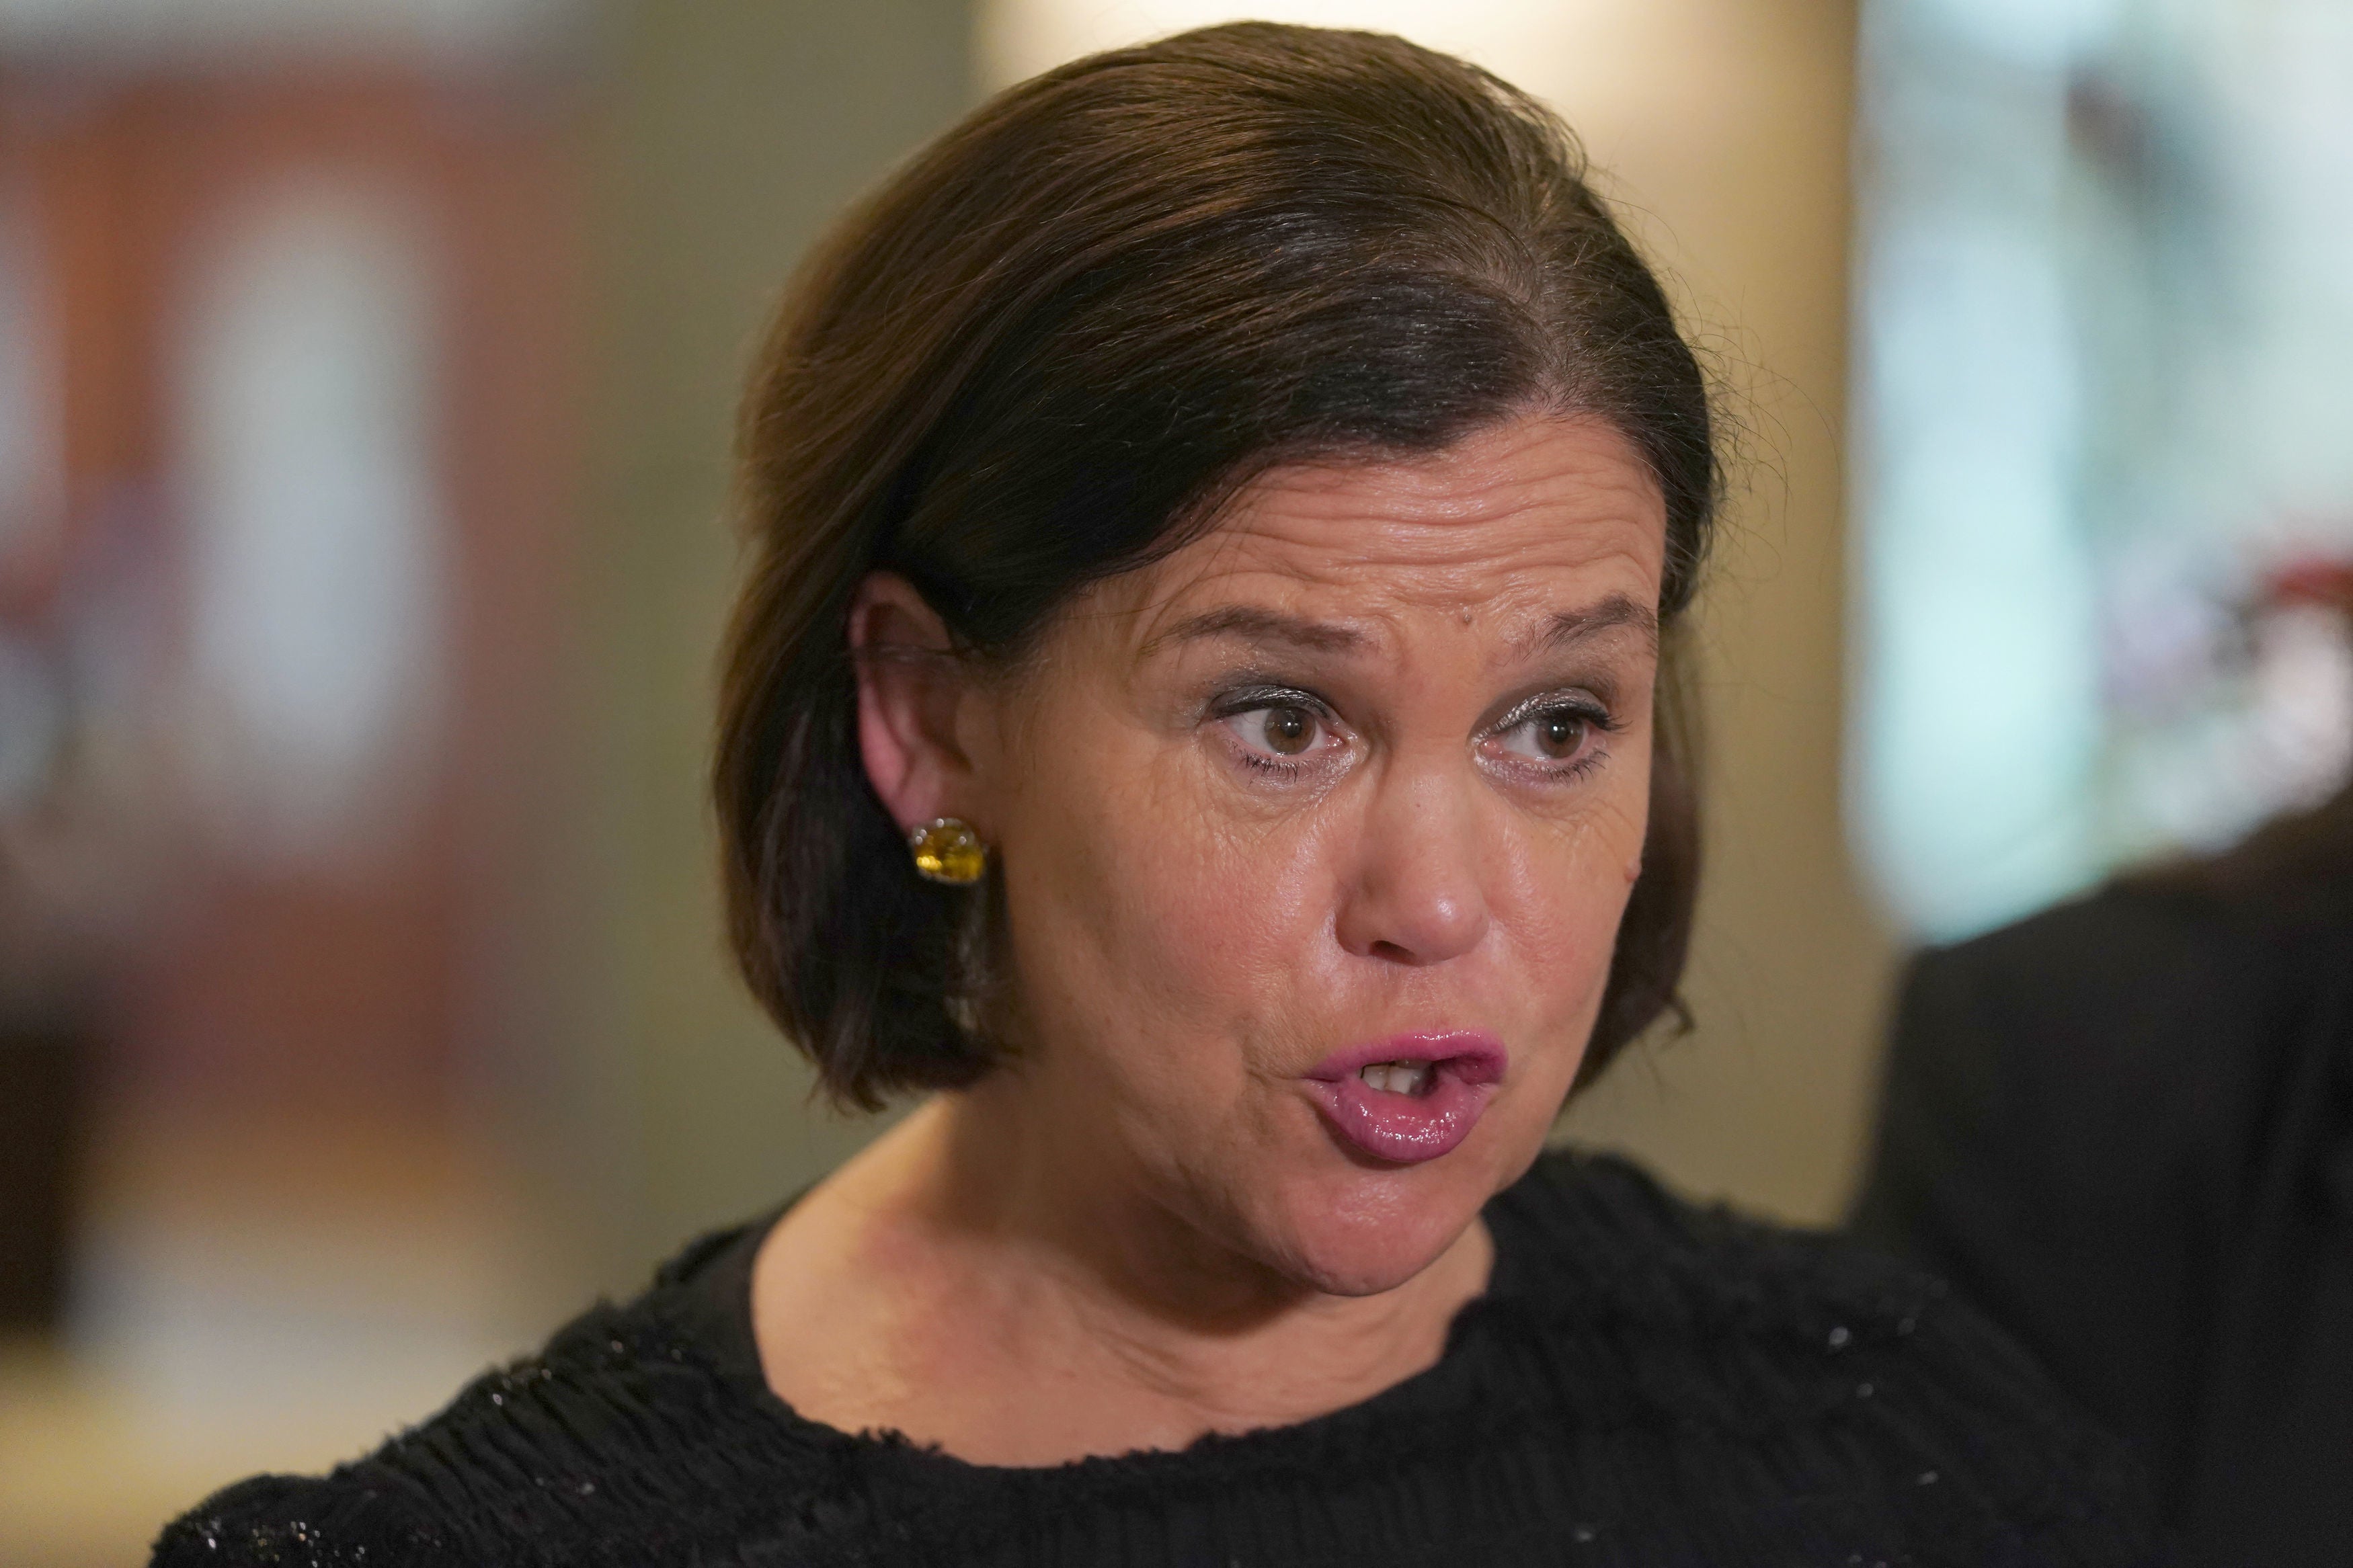 Sinn Fein president Mary Lou McDonald urged the Irish Government to do more (Brian Lawless/PA)